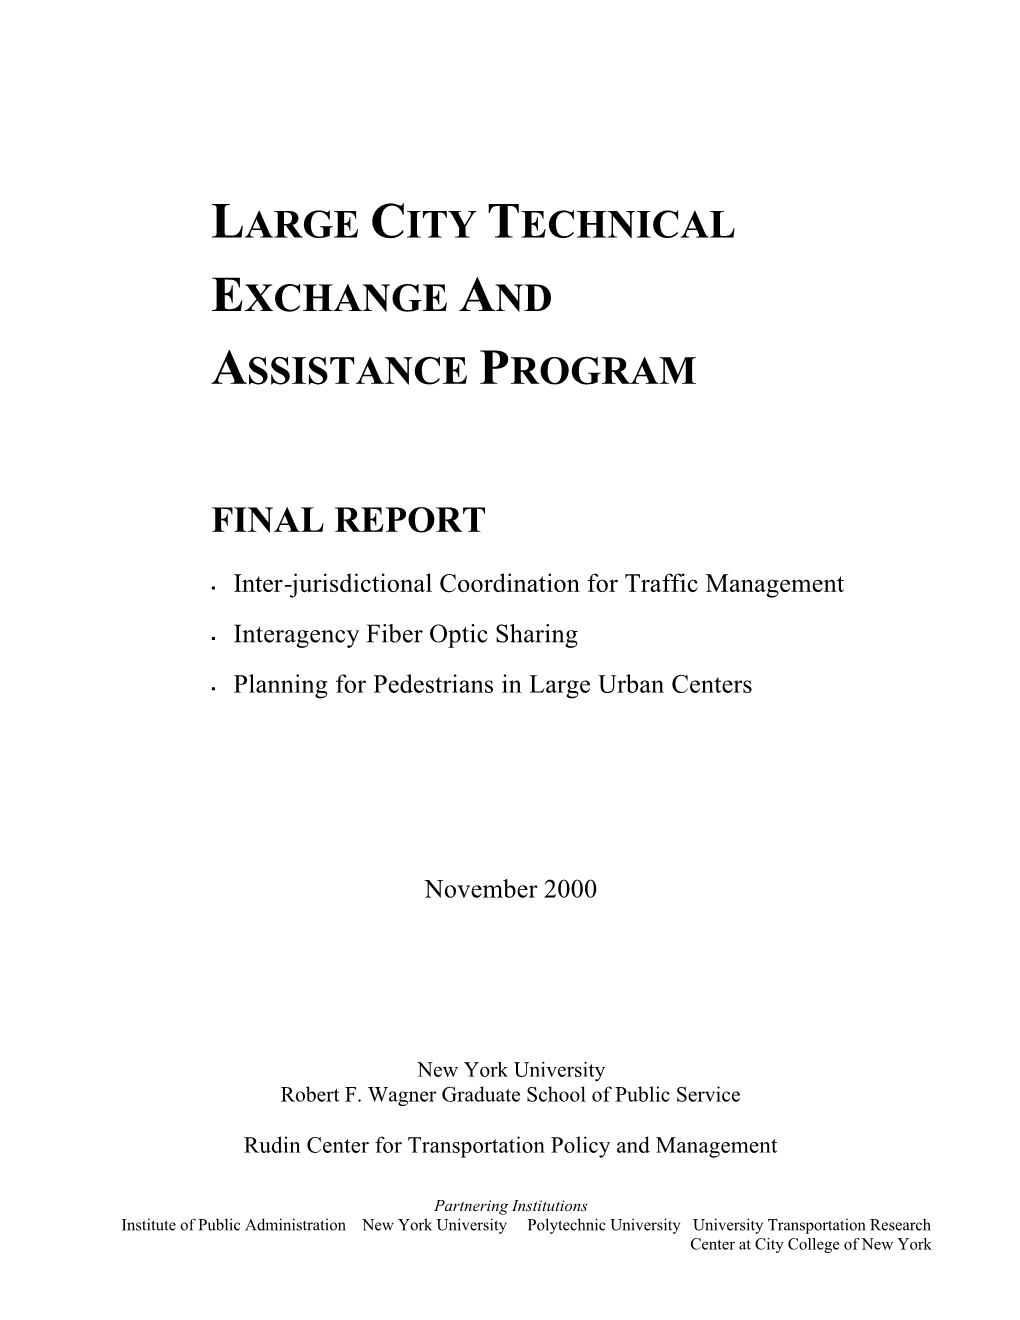 Large City Technical Exchange and Assistance Program